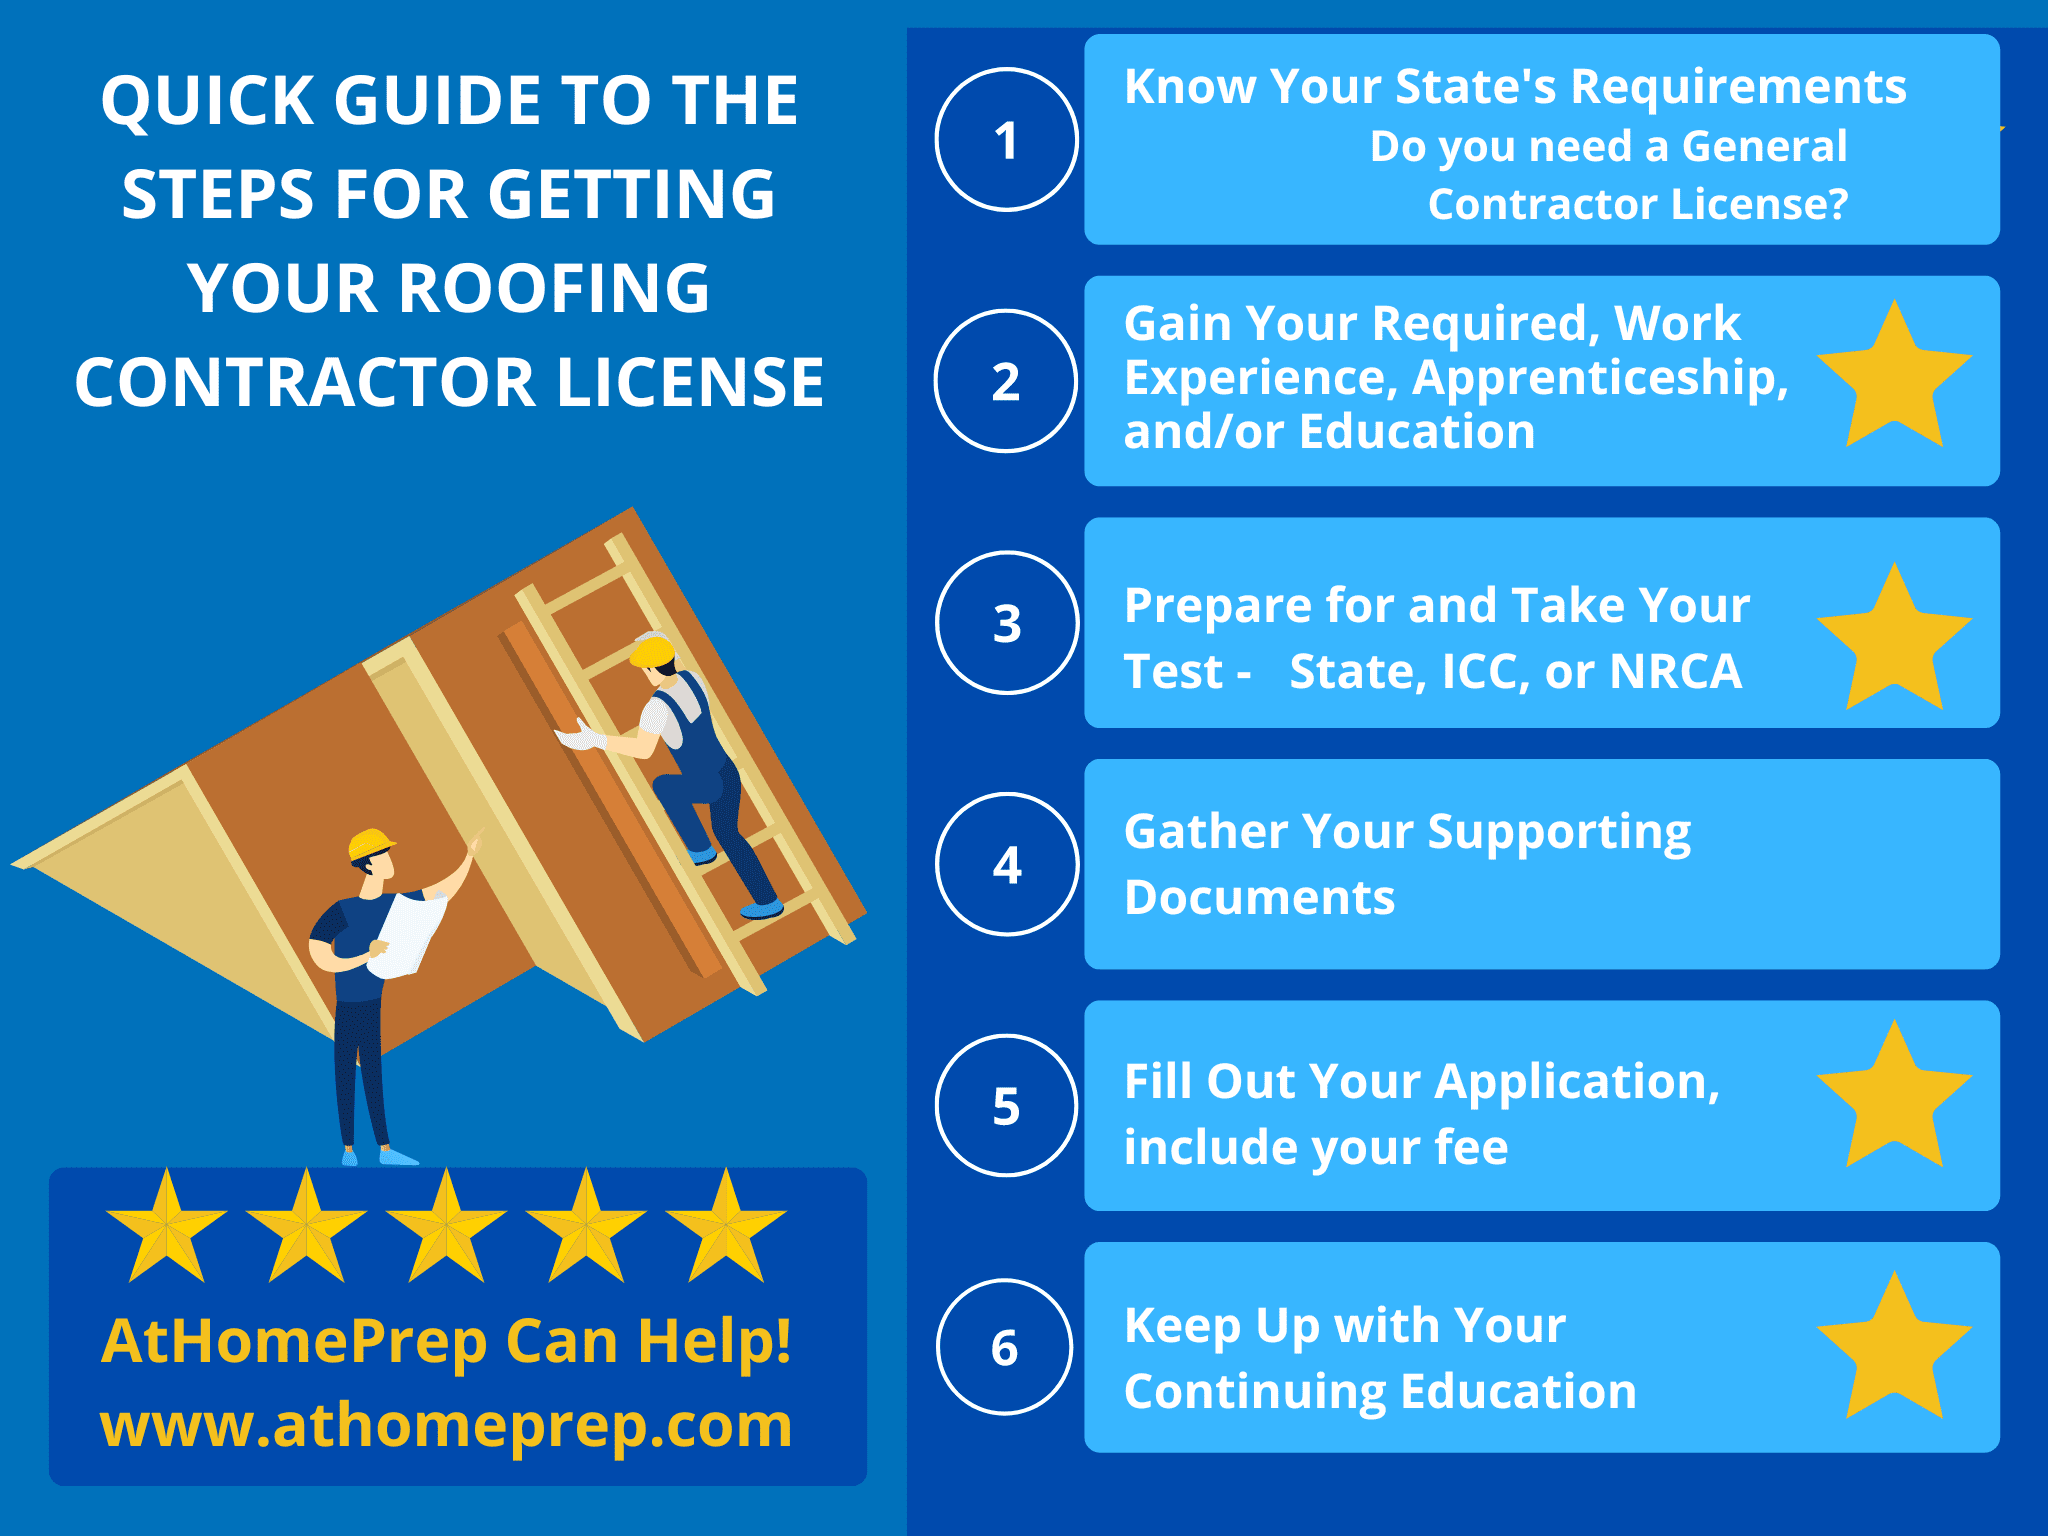 How to Get Your Roofing Contractor License